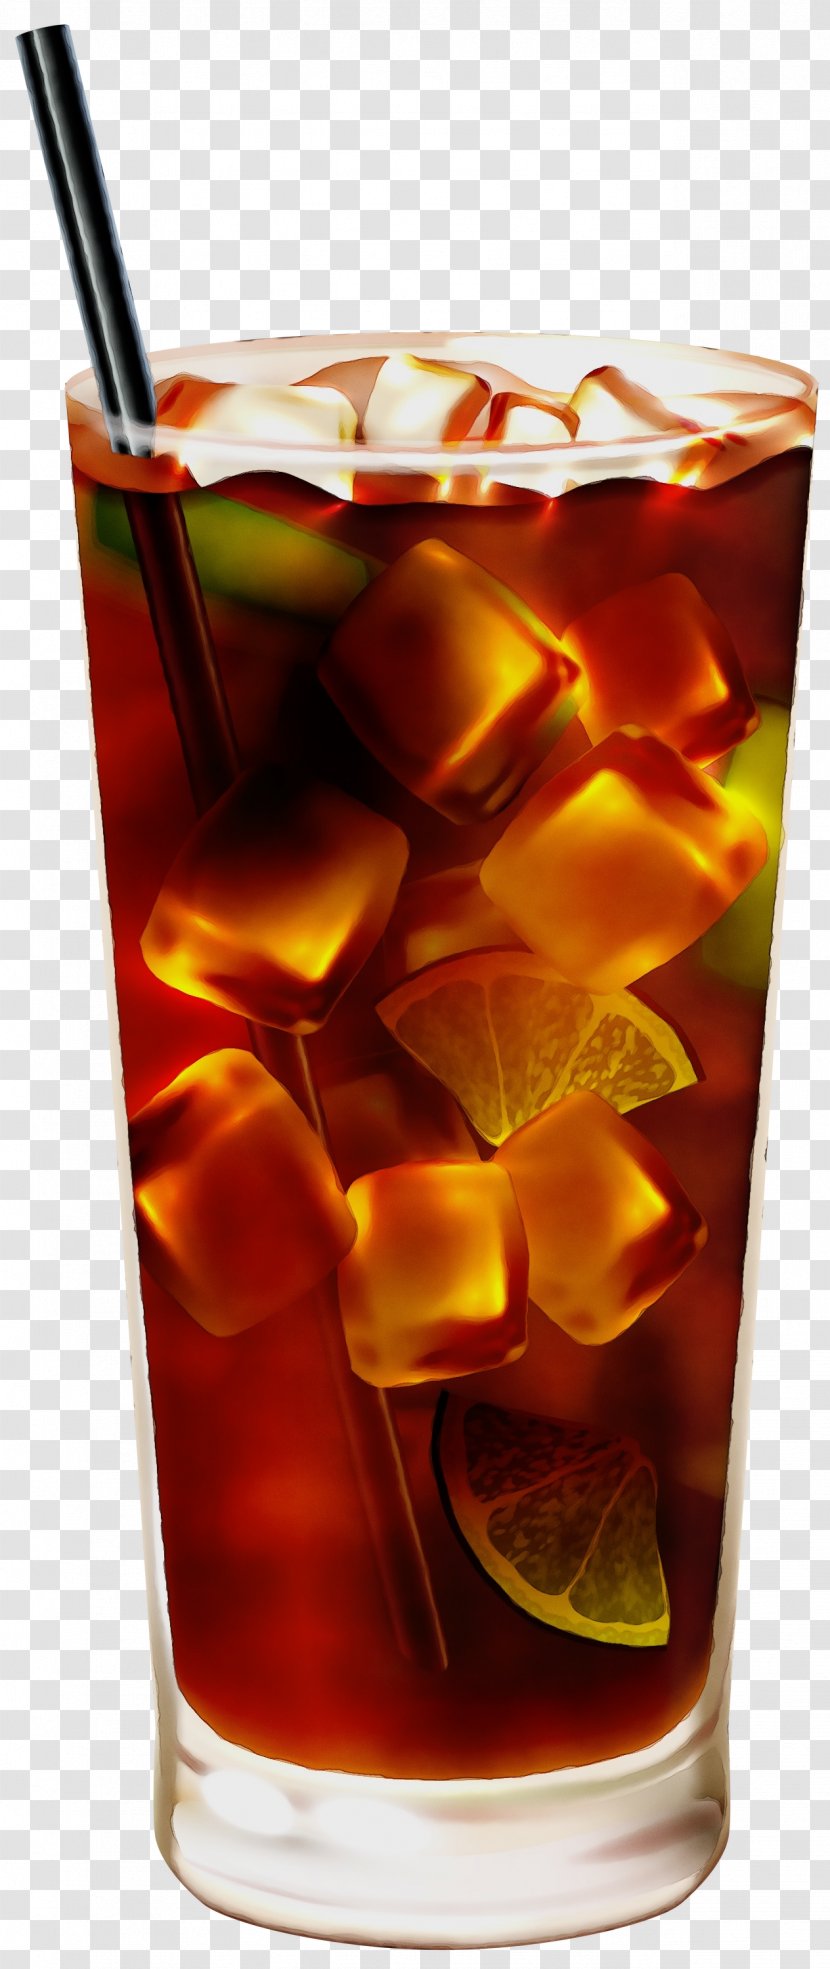 Ice Cube - Punch - Drinkware Whisky Transparent PNG